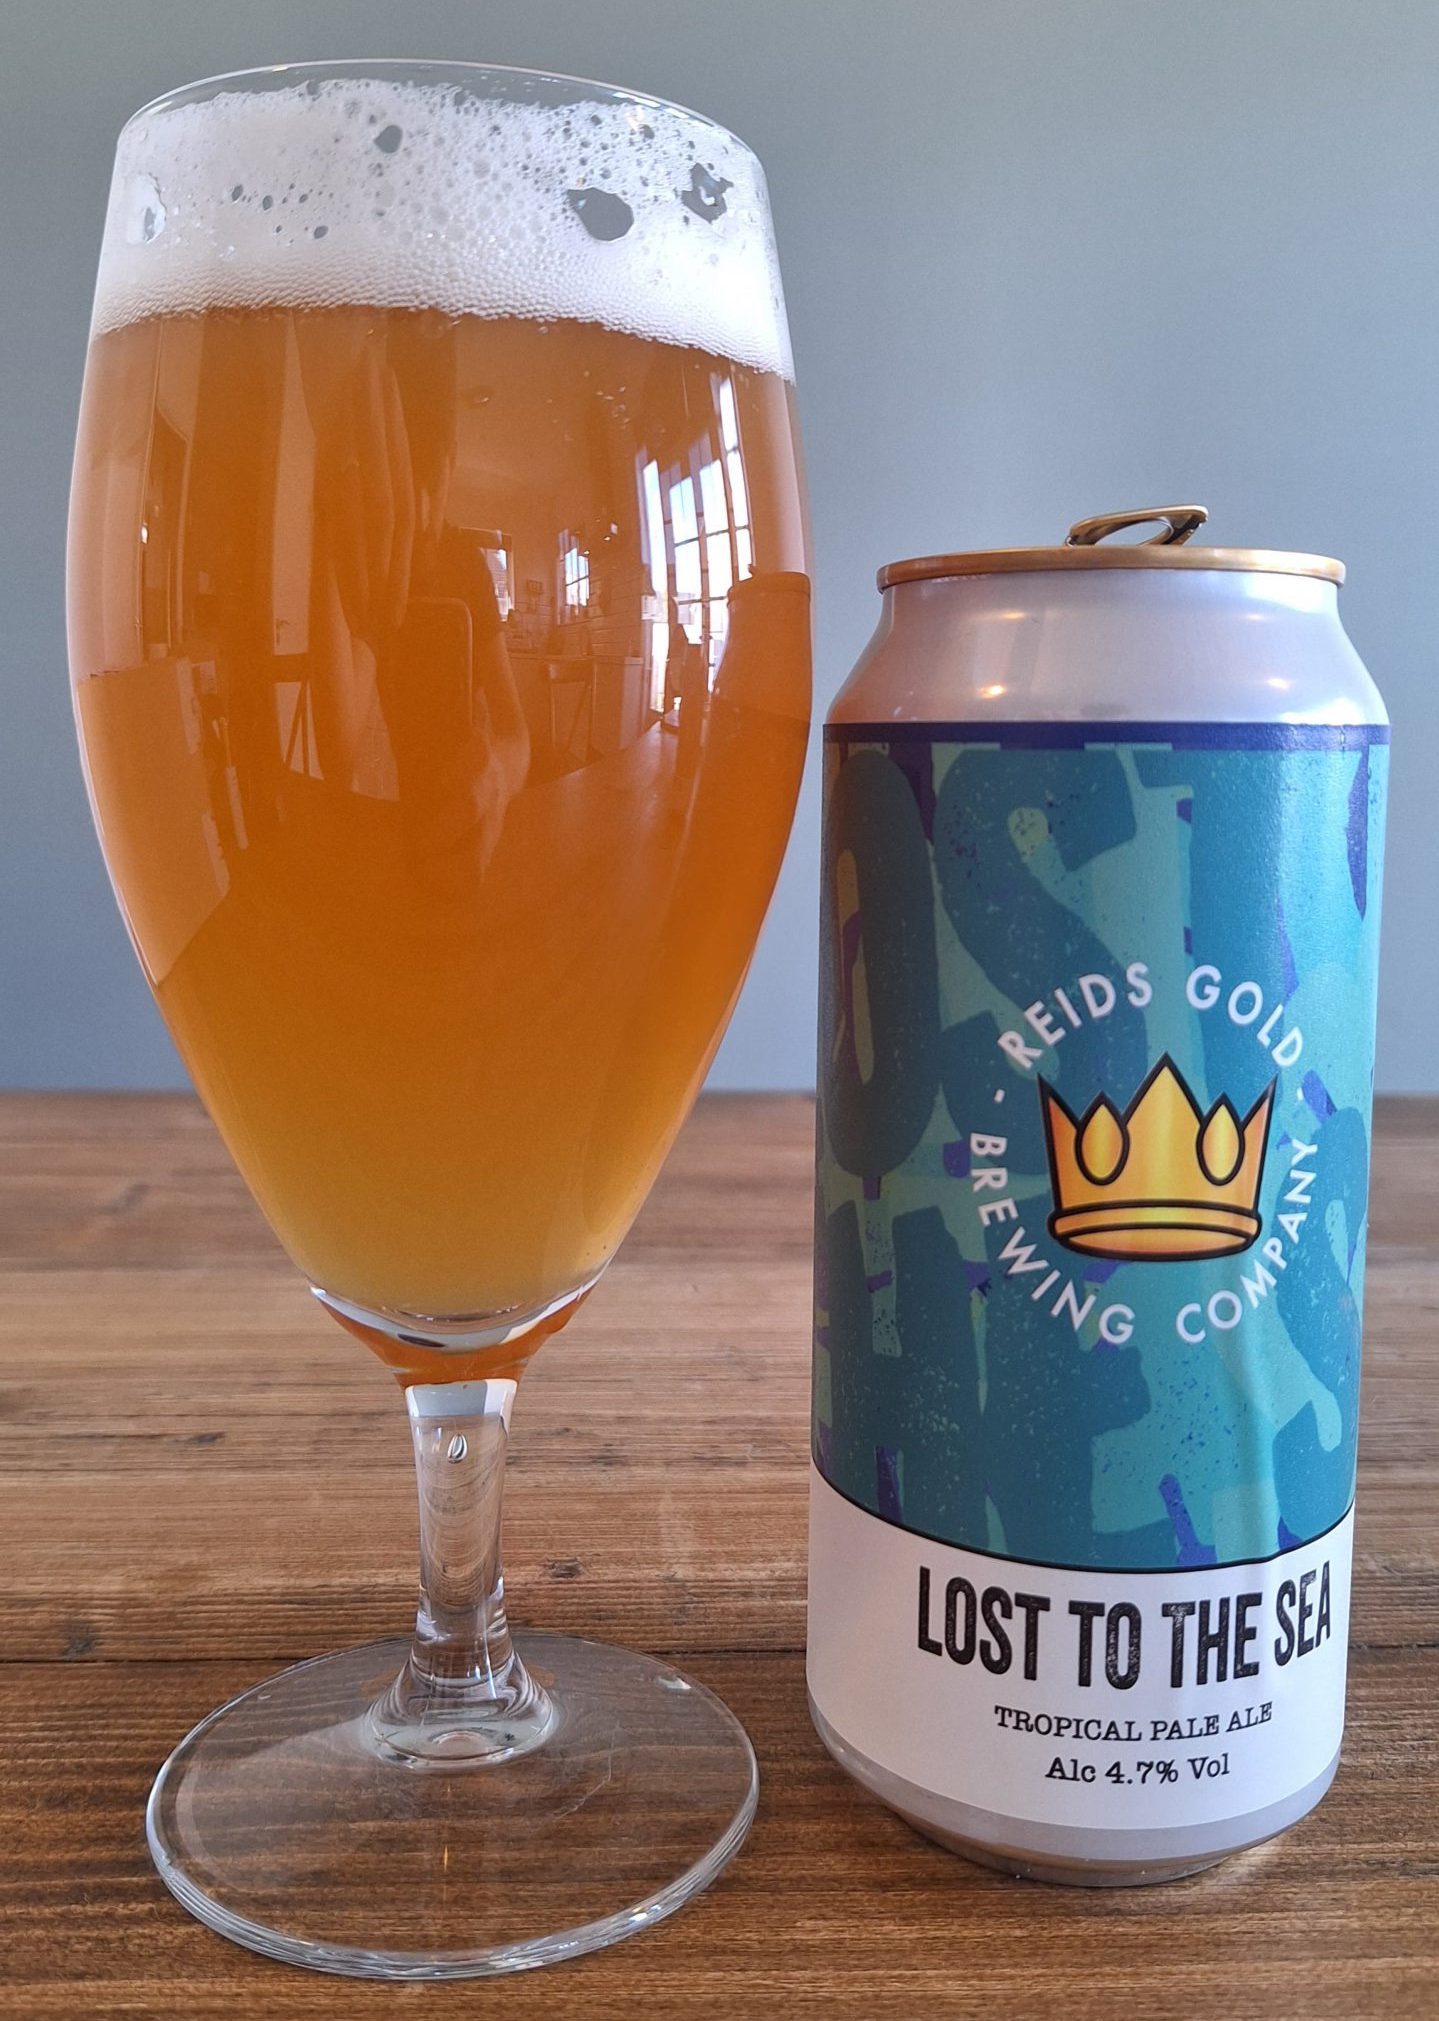 The Lost to the Sea beer from Reids Gold, a Brewery in Stonehaven. 